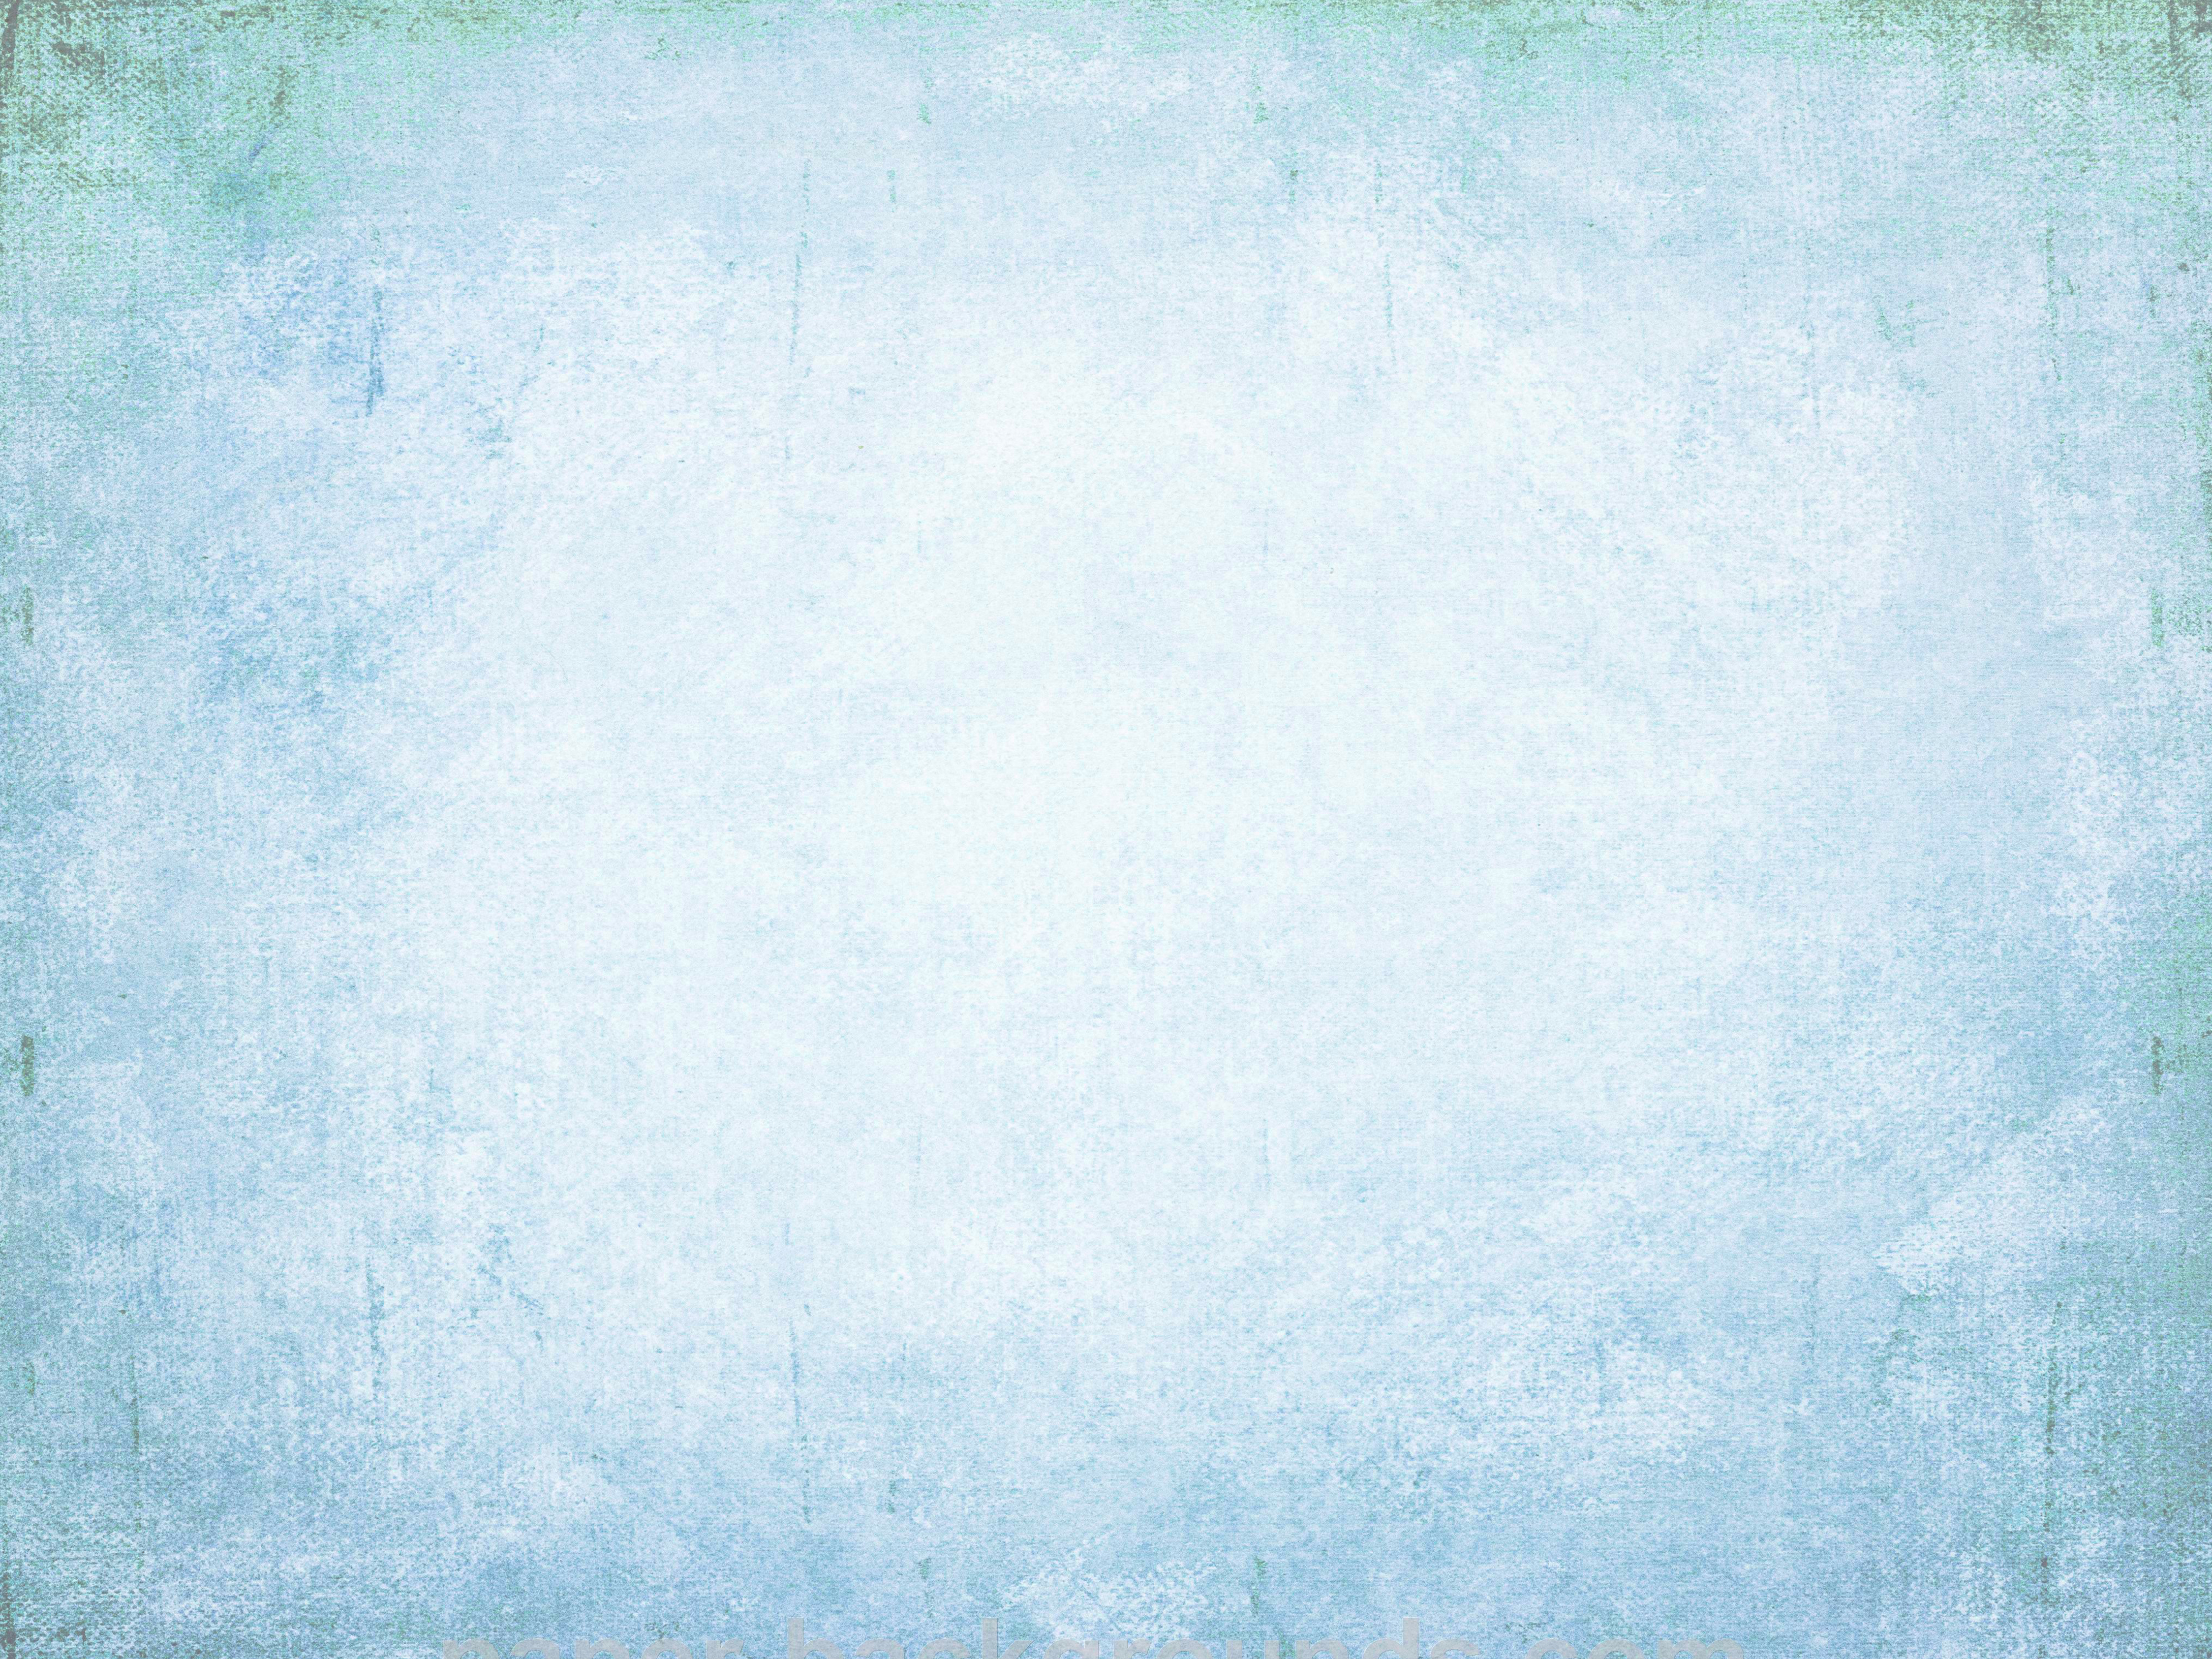 grunge-blue-painted-wall-background-copy.jpg | The Punches